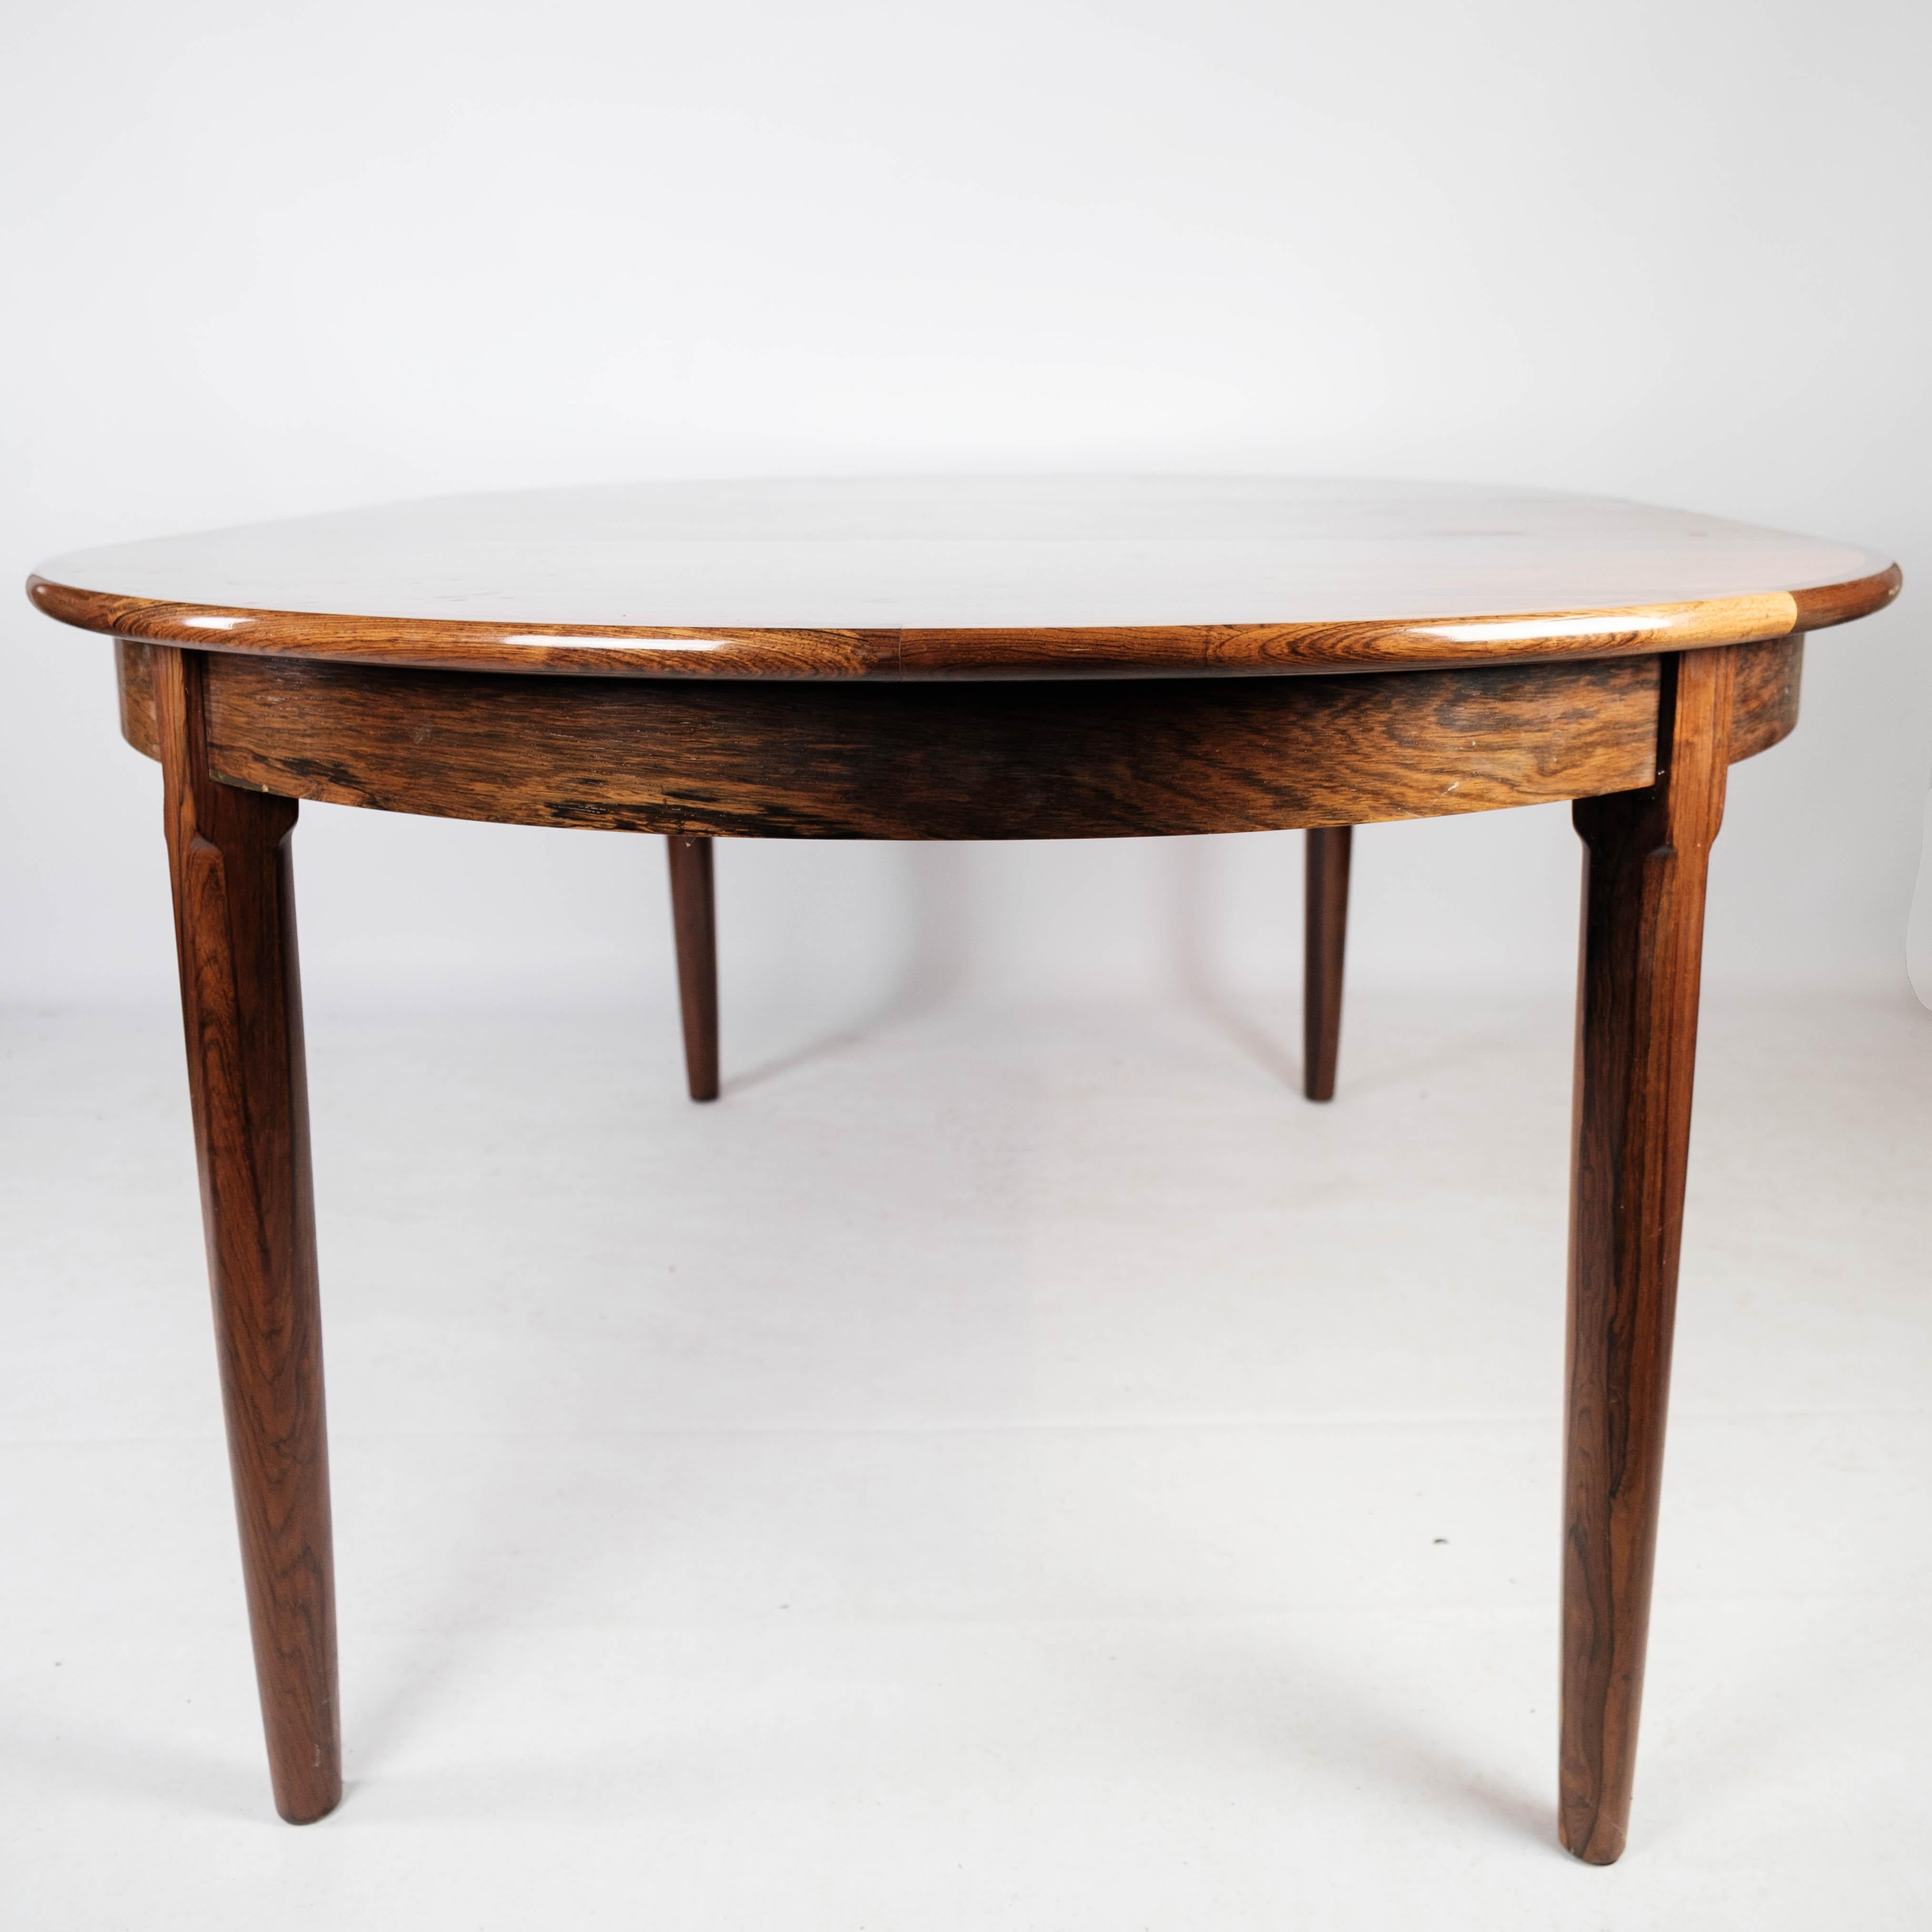 Dining Table Made In Rosewood With Extension, Danish Design From 1960s For Sale 9